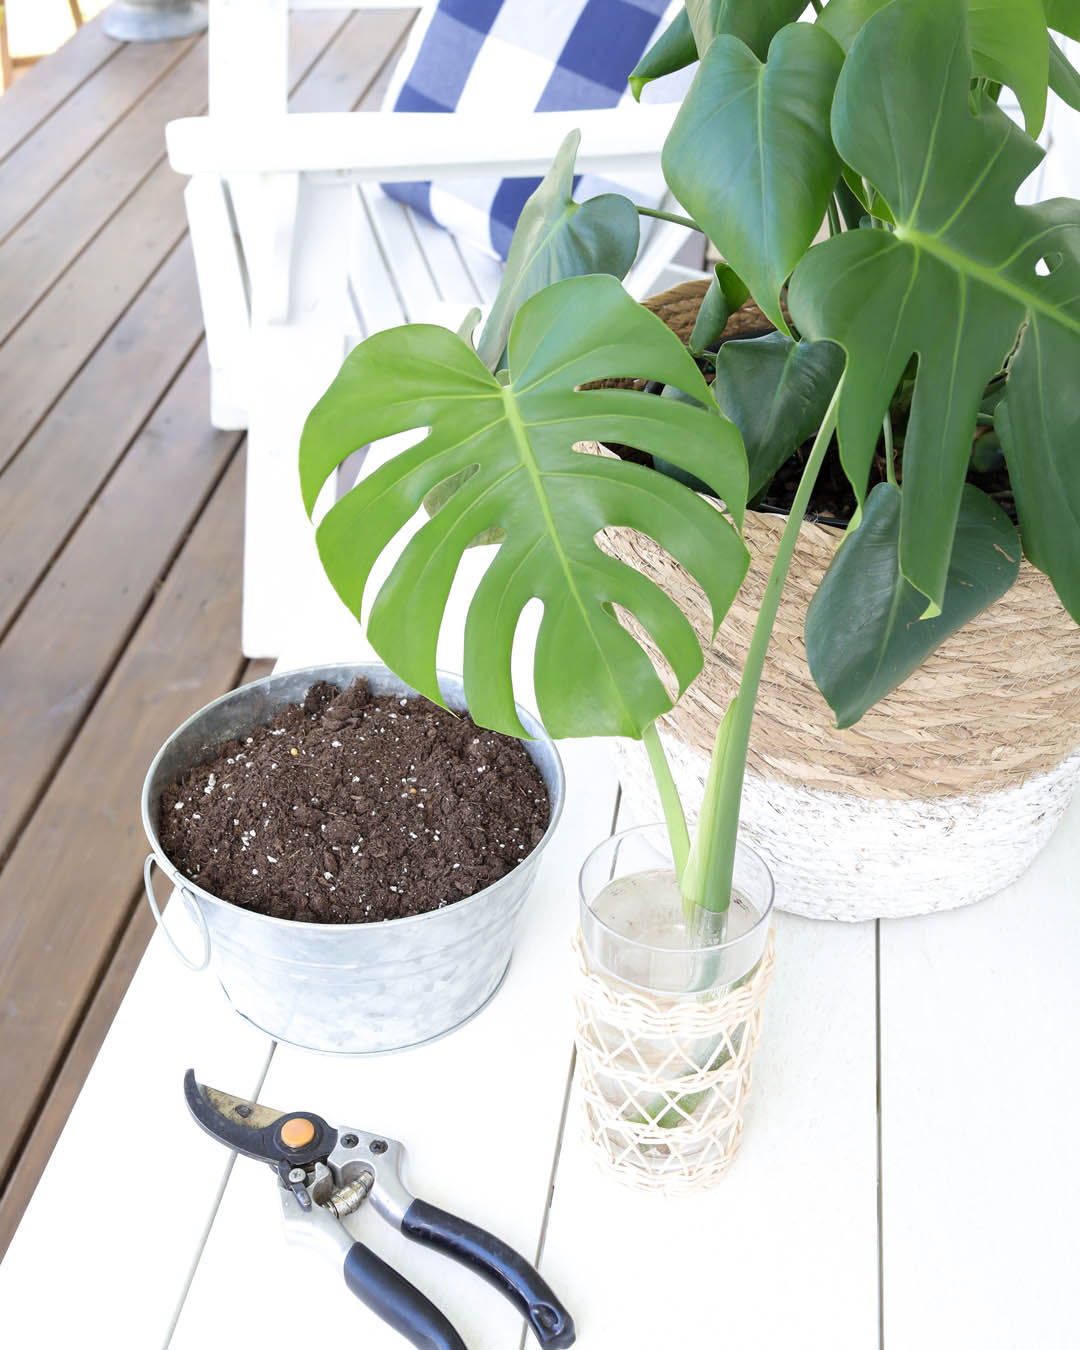 You may have heard that it's really easy to propagate monstera plants, but there's a little trick to it that will make all the difference in how successful you are!